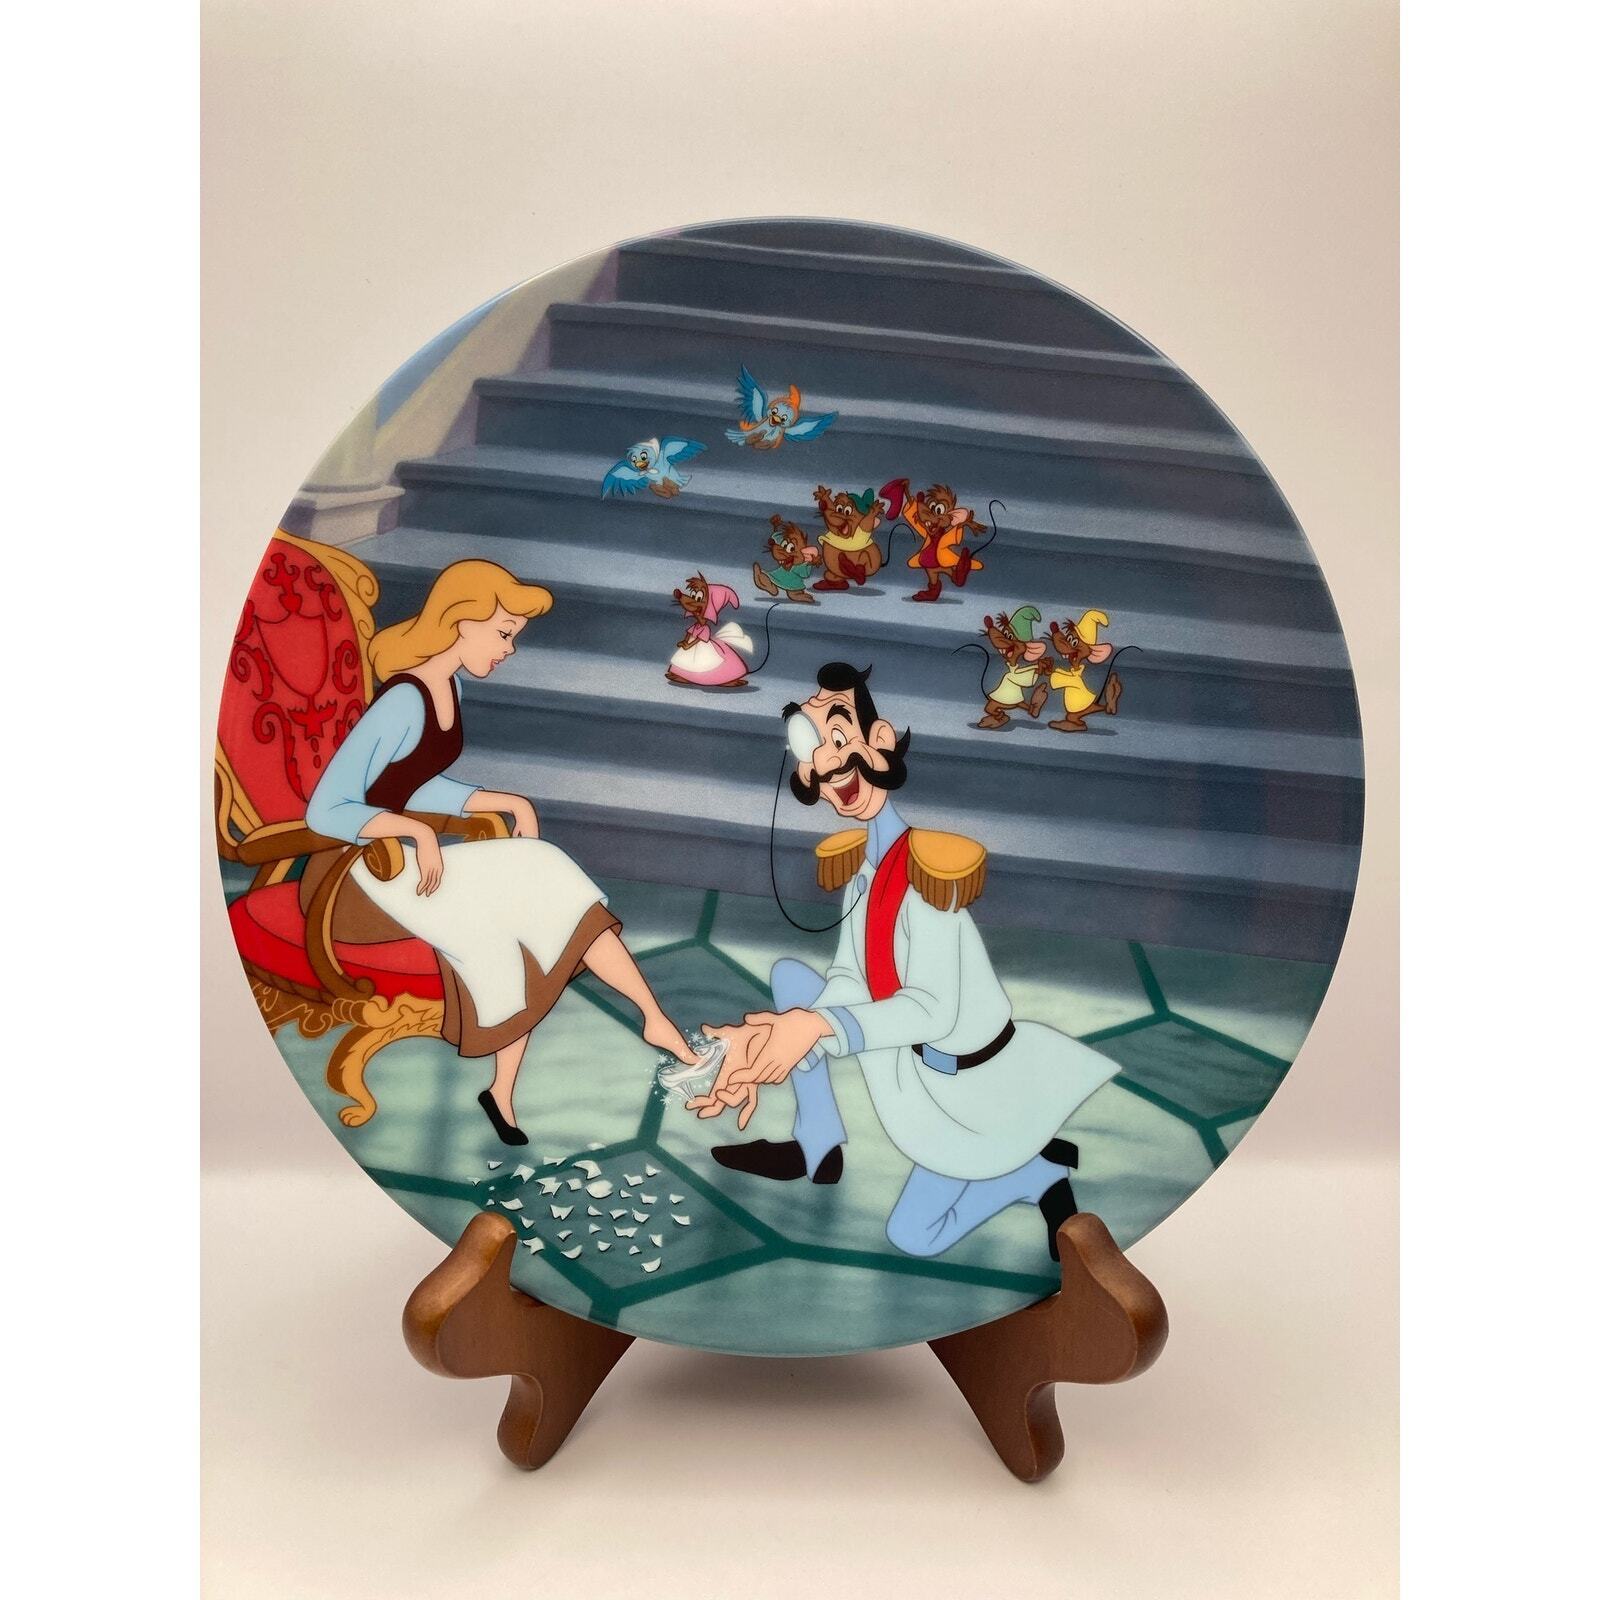 Vintage Disney Knowles Collector Plate Cinderella ”If the Shoe Fits\